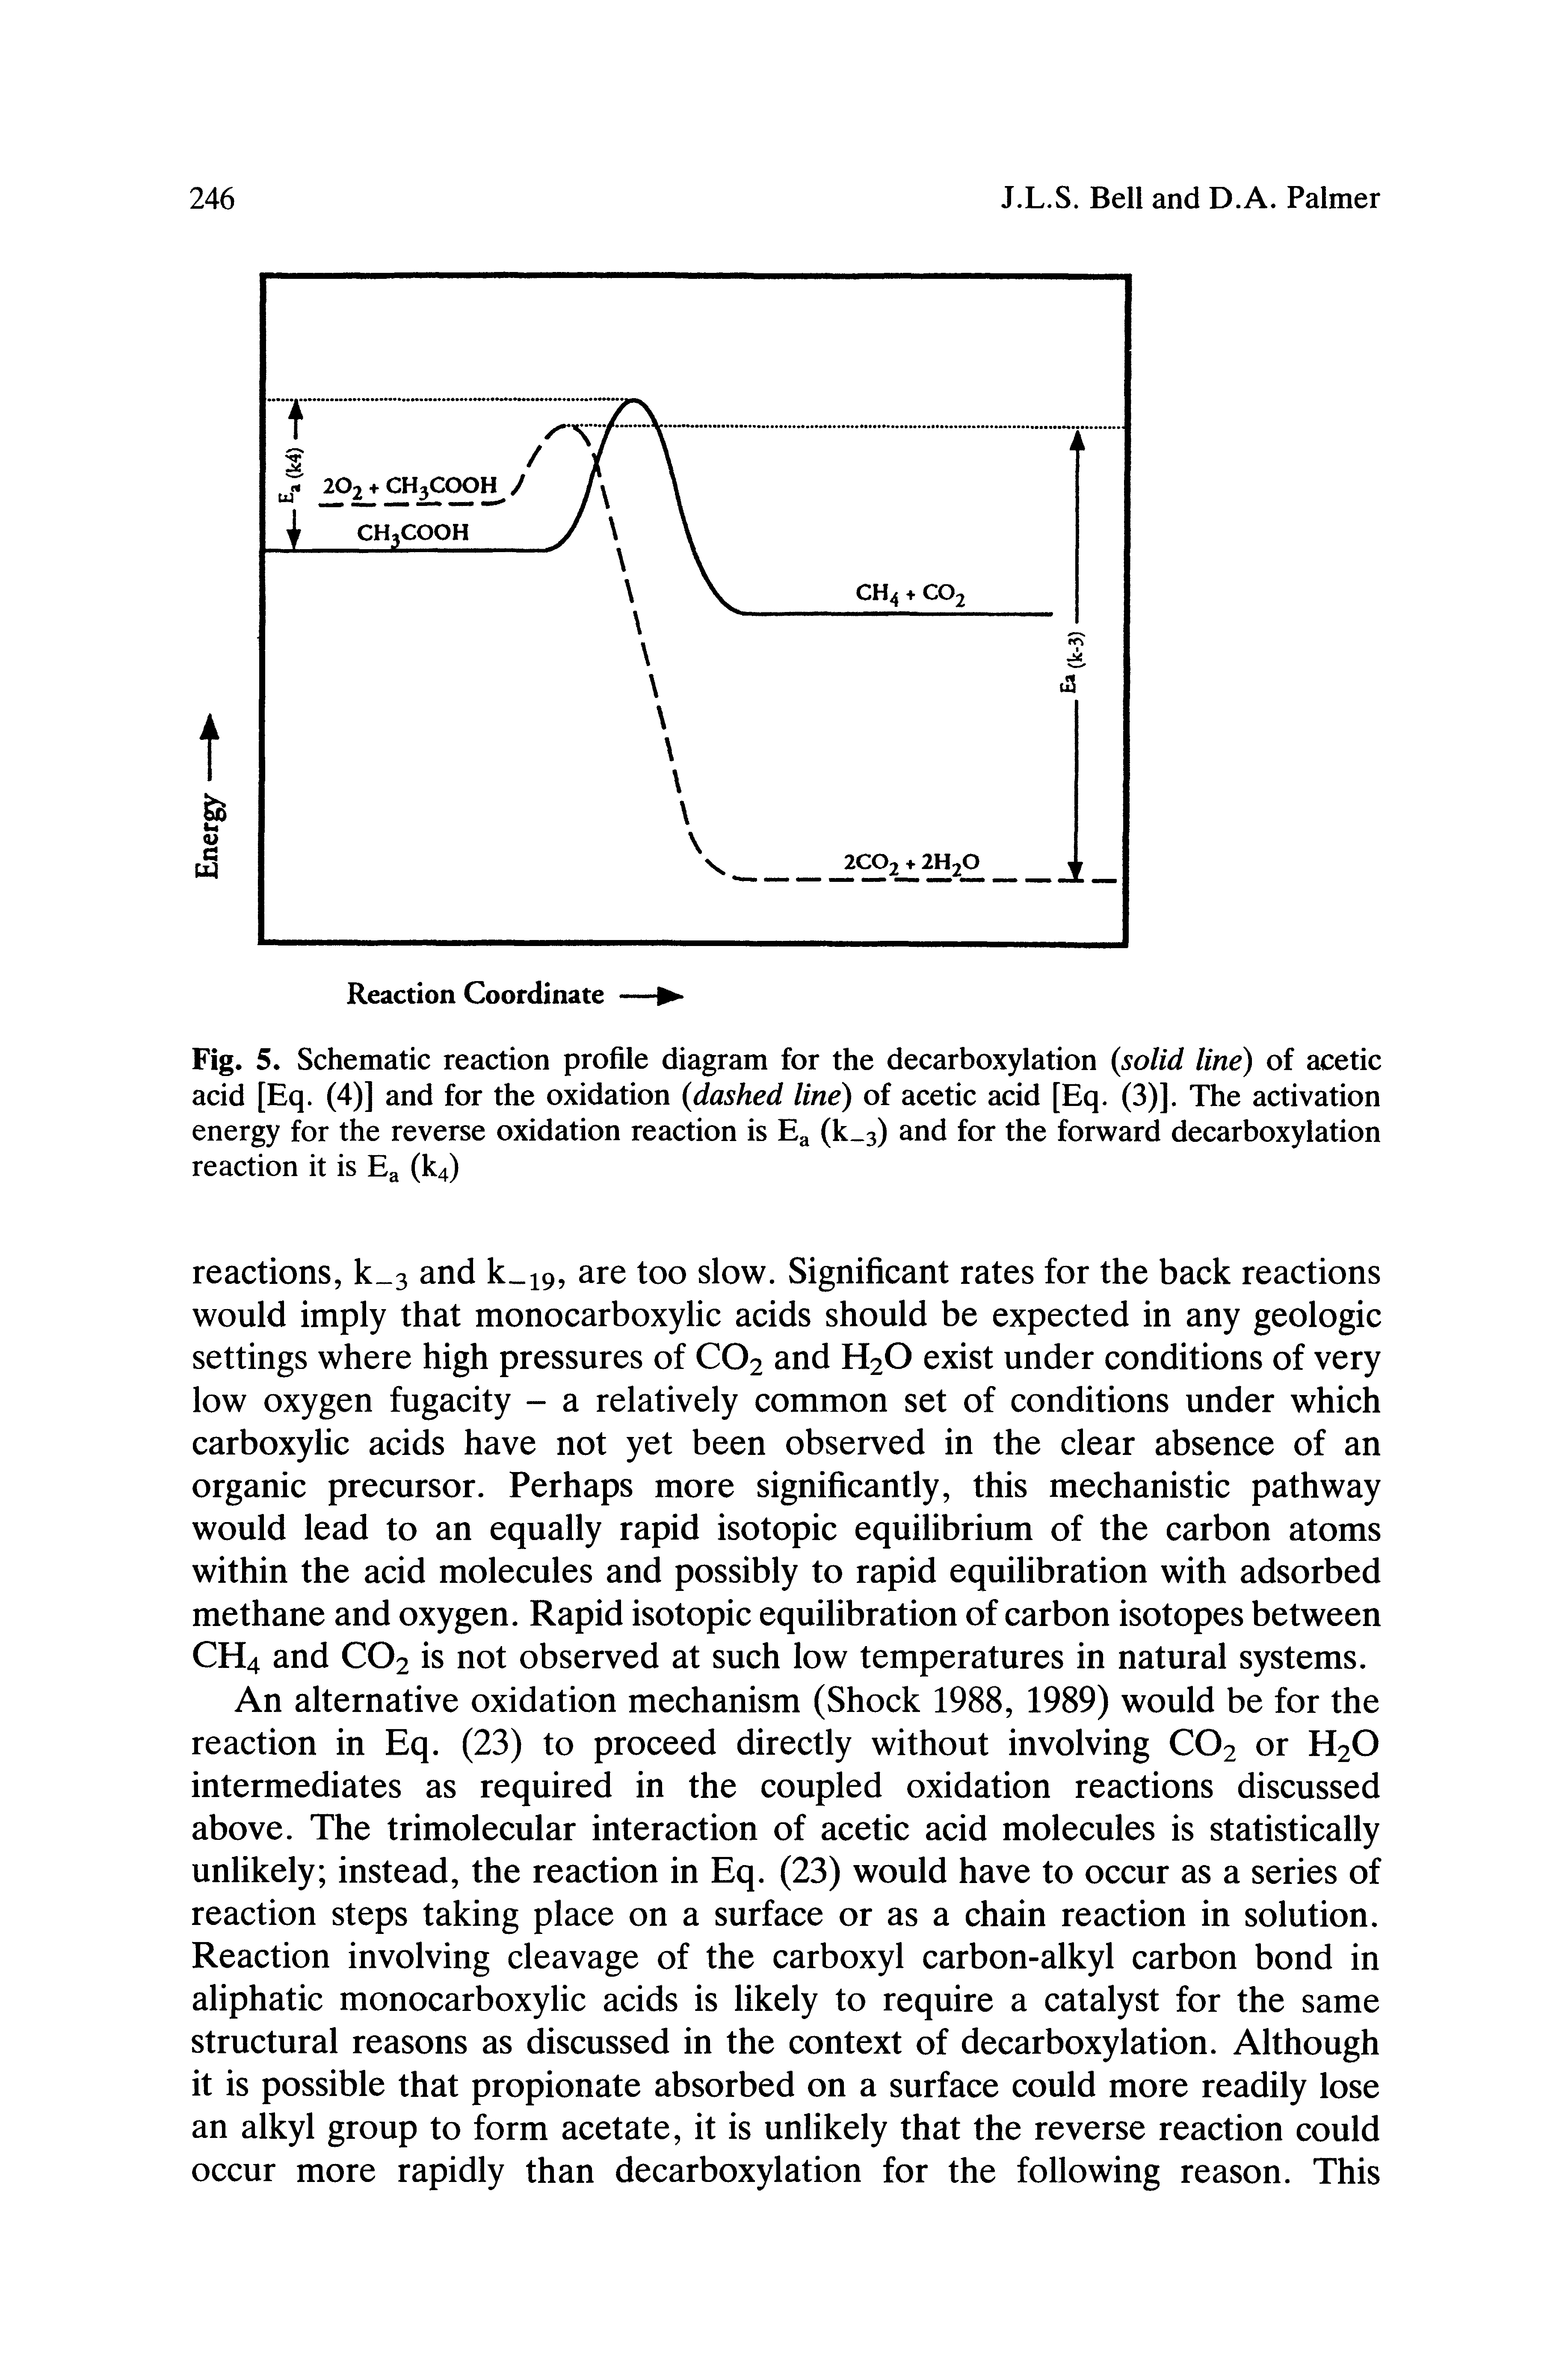 Fig. 5. Schematic reaction profile diagram for the decarboxylation solid line) of acetic acid [Eq. (4)] and for the oxidation dashed line) of acetic acid [Eq. (3)]. The activation energy for the reverse oxidation reaction is E (k 3) and for the forward decarboxylation reaction it is Eg (IC4)...